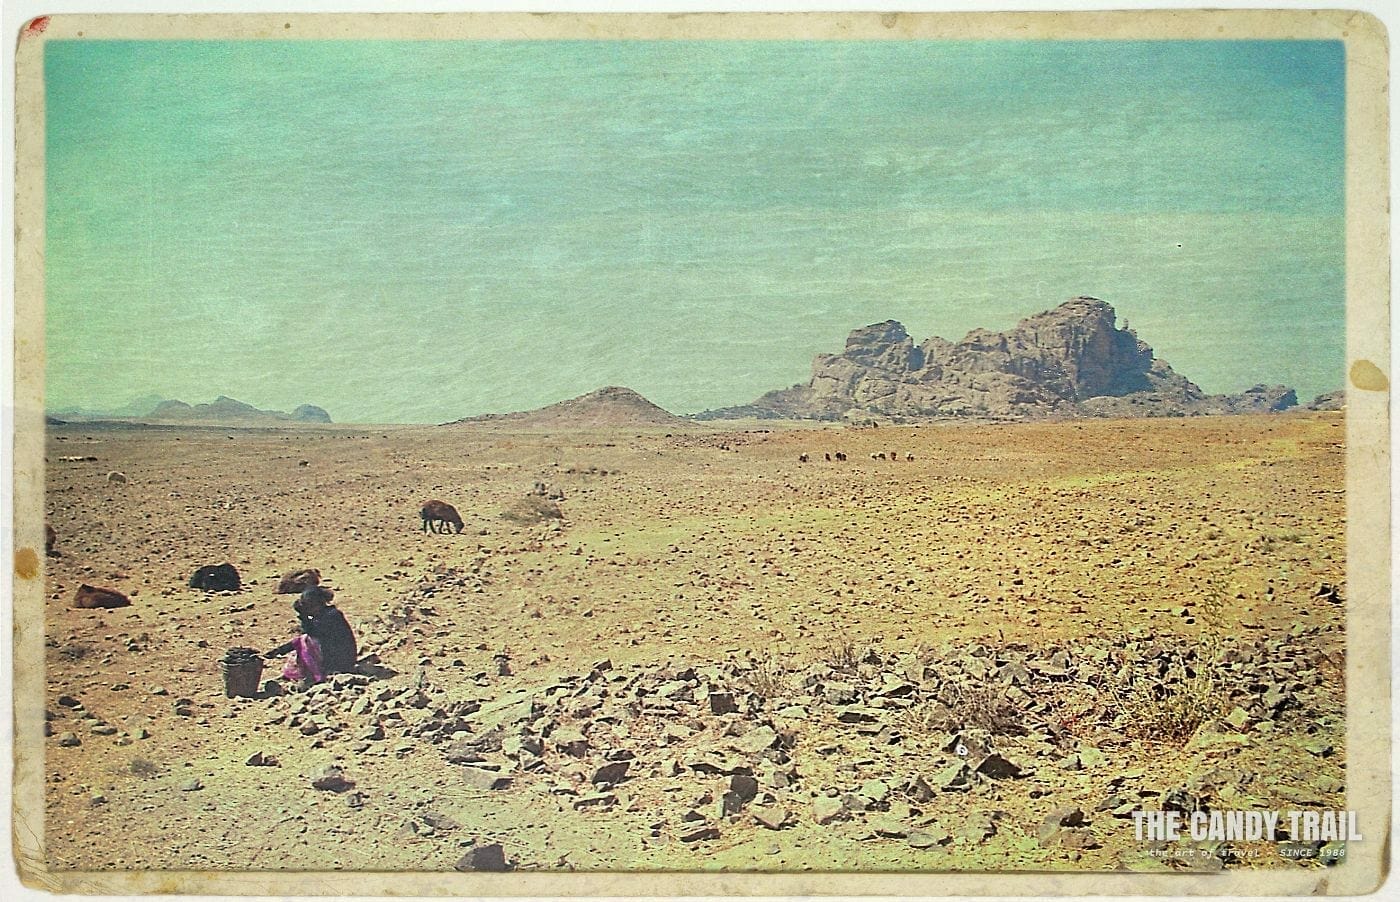 Shepard with flock in the arid surrounds of matara in southern Eritrea